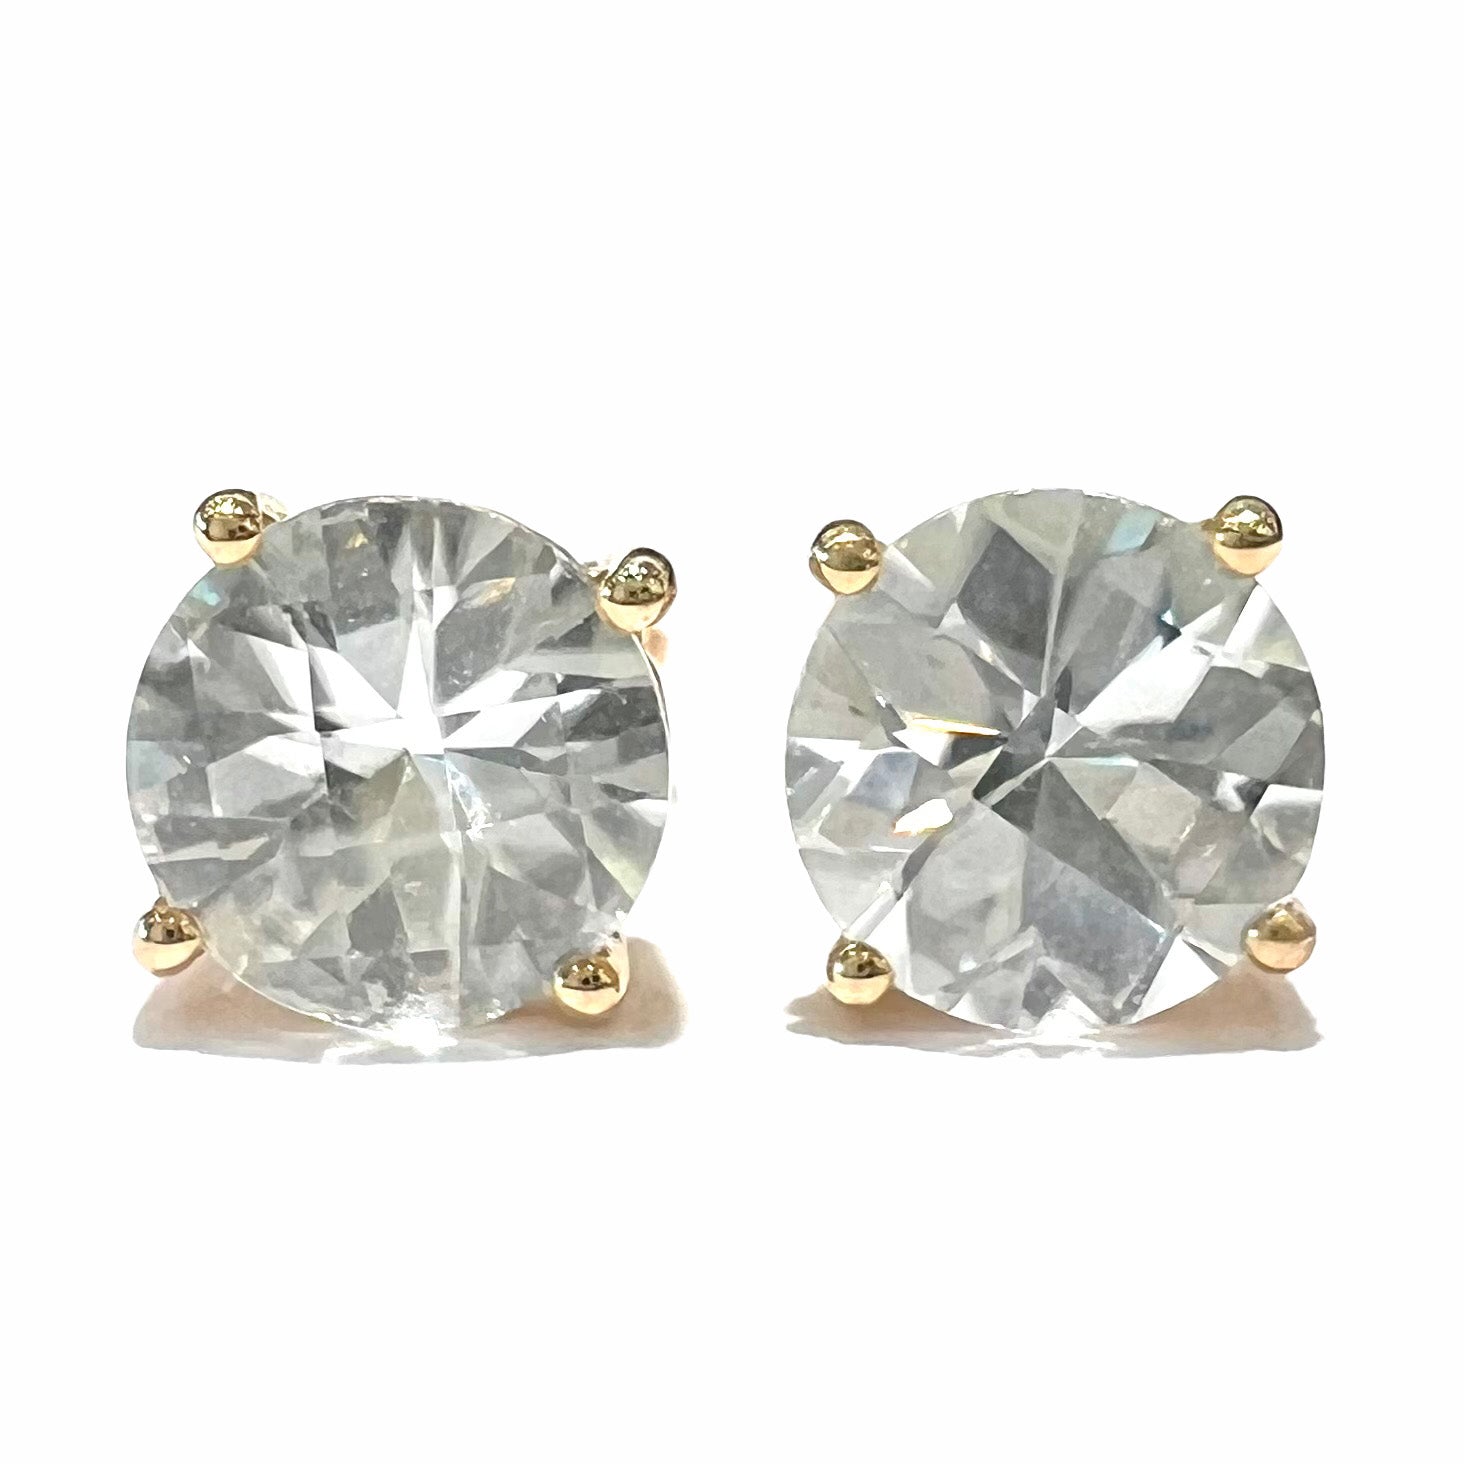 A pair of checkerboard round brilliant cut white zircon stud earrings in yellow gold.